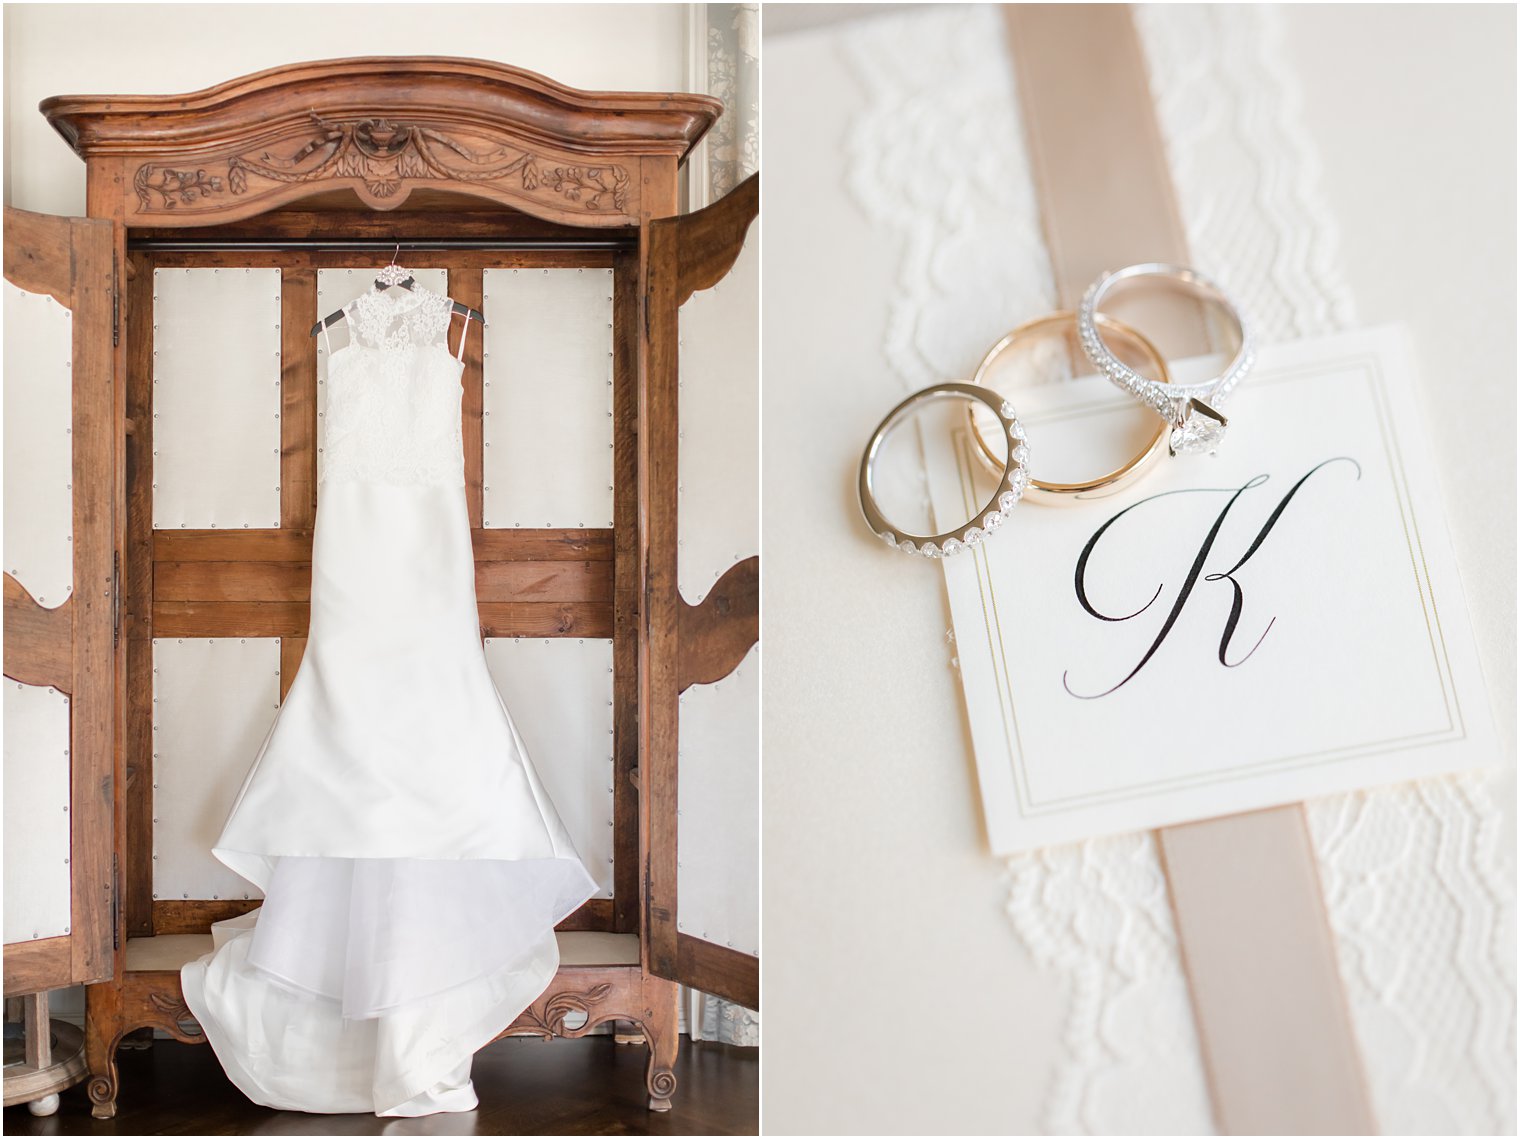 Wedding dress and invitation at Park Chateau Estate bridal suite